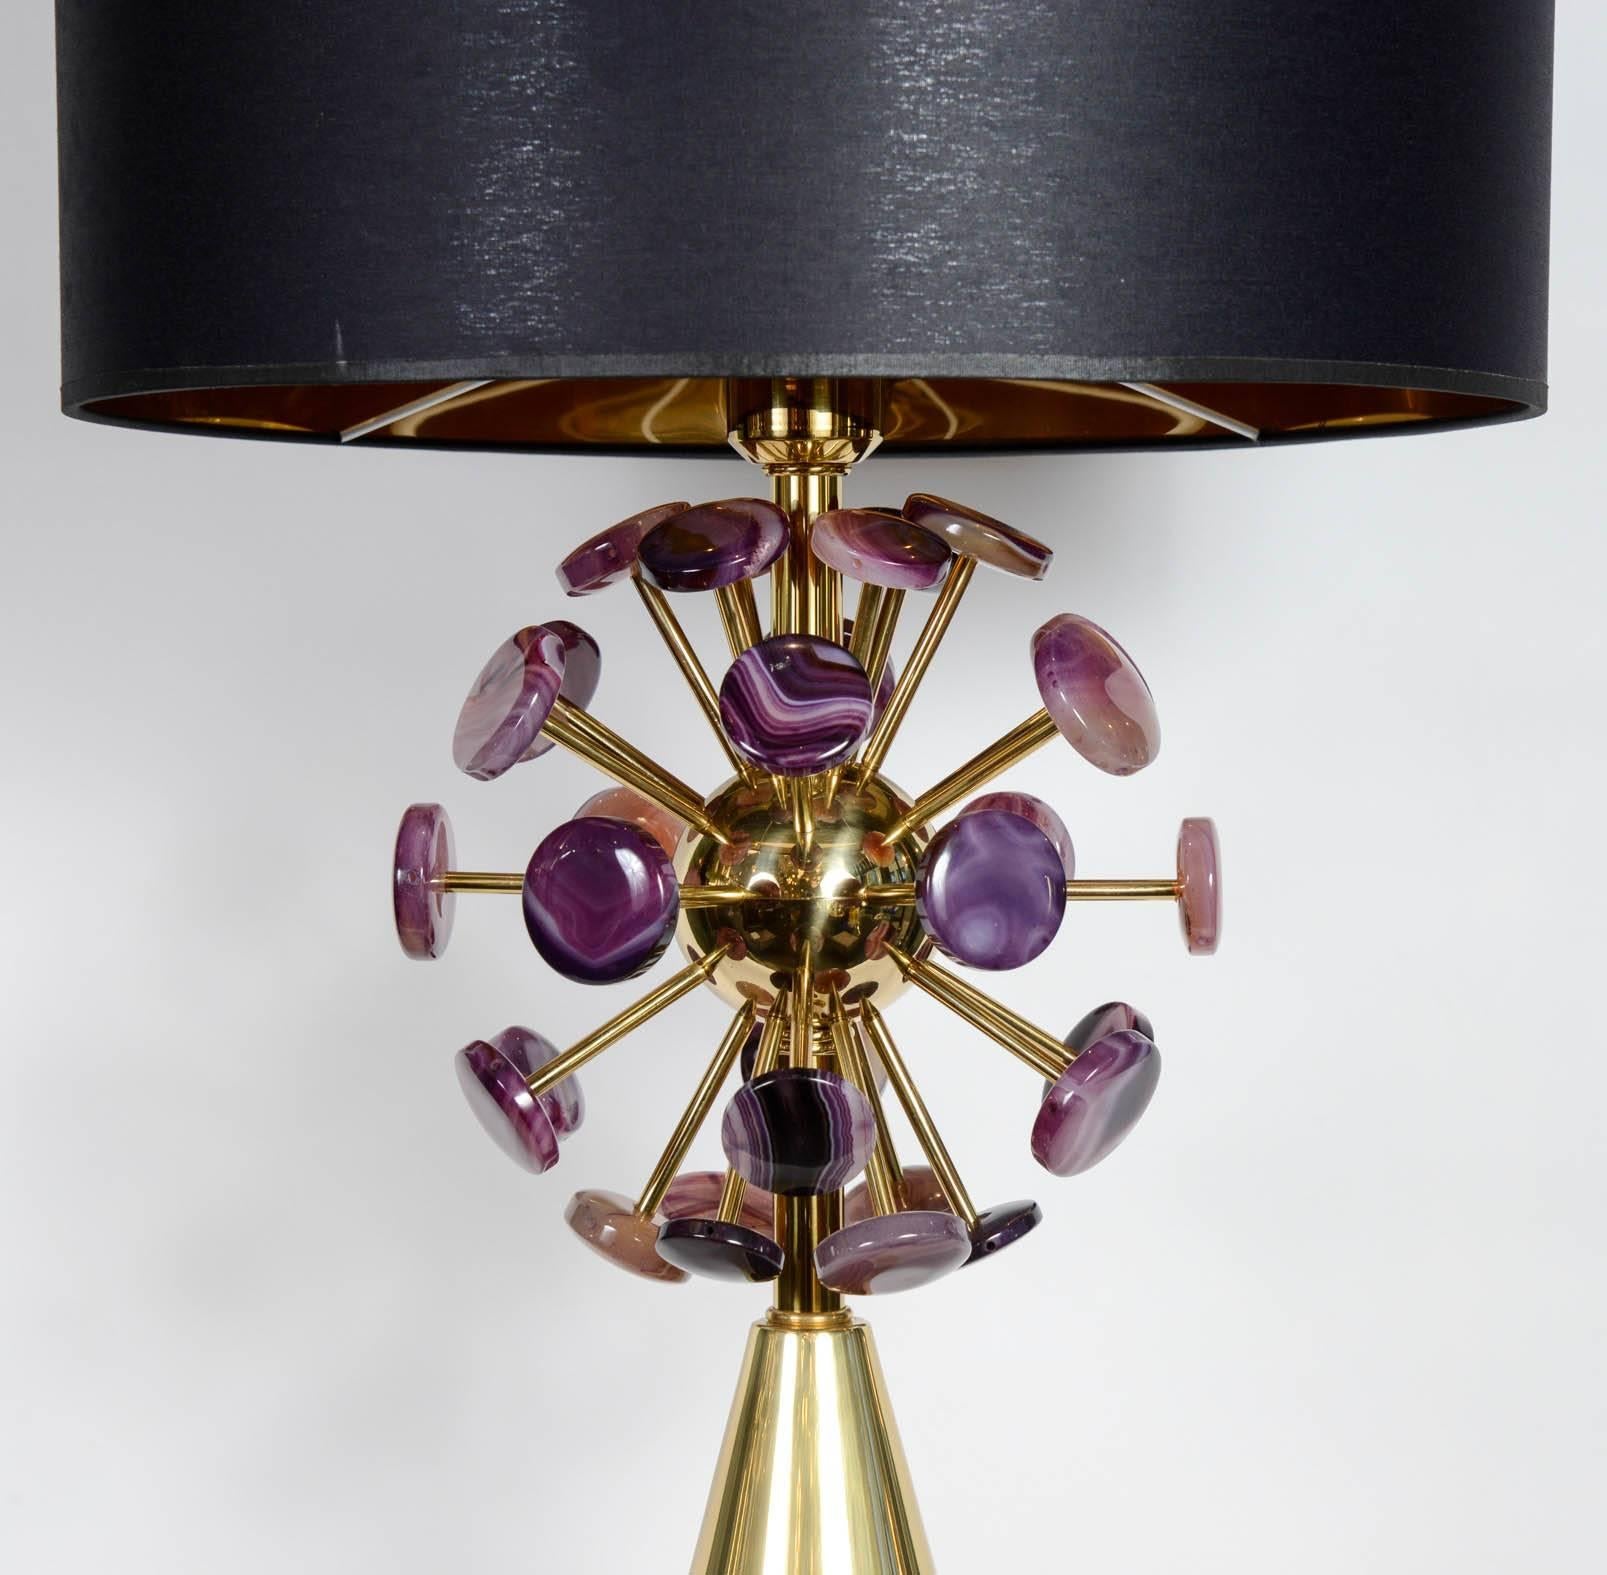 One of a kind 
Pair of lamps with purple agates
Designed for Régis Royant Gallery.